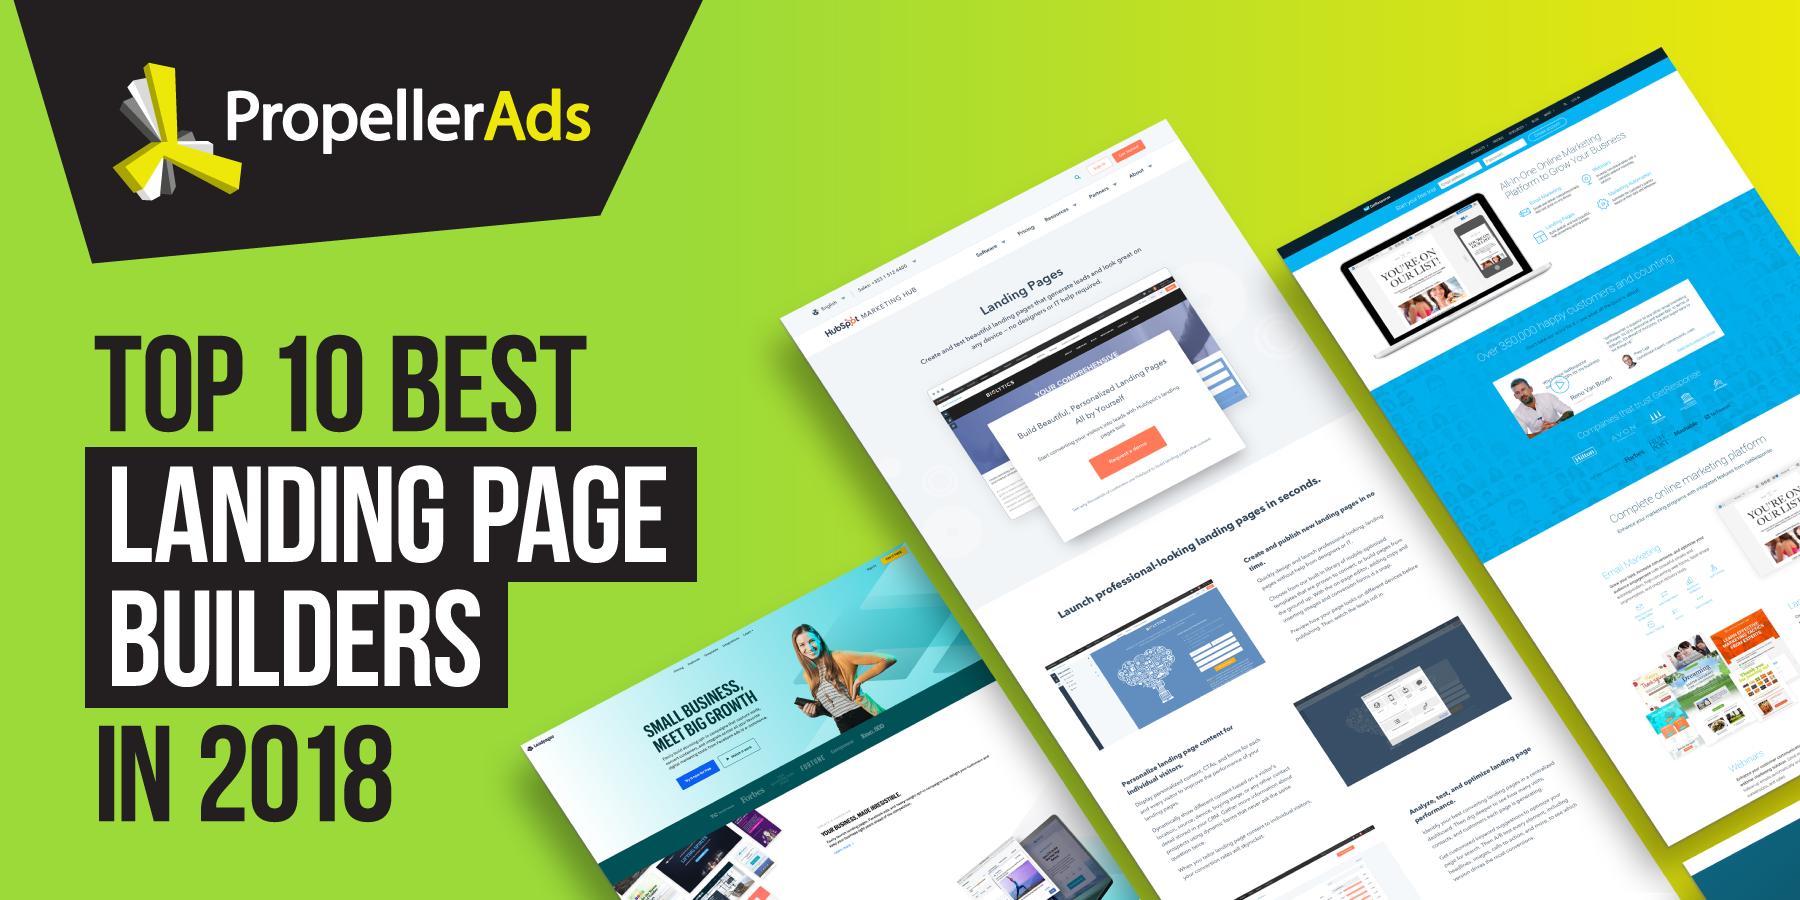 Read more: Our Picks For The Top 10 Best Landing Page Builders in 2018